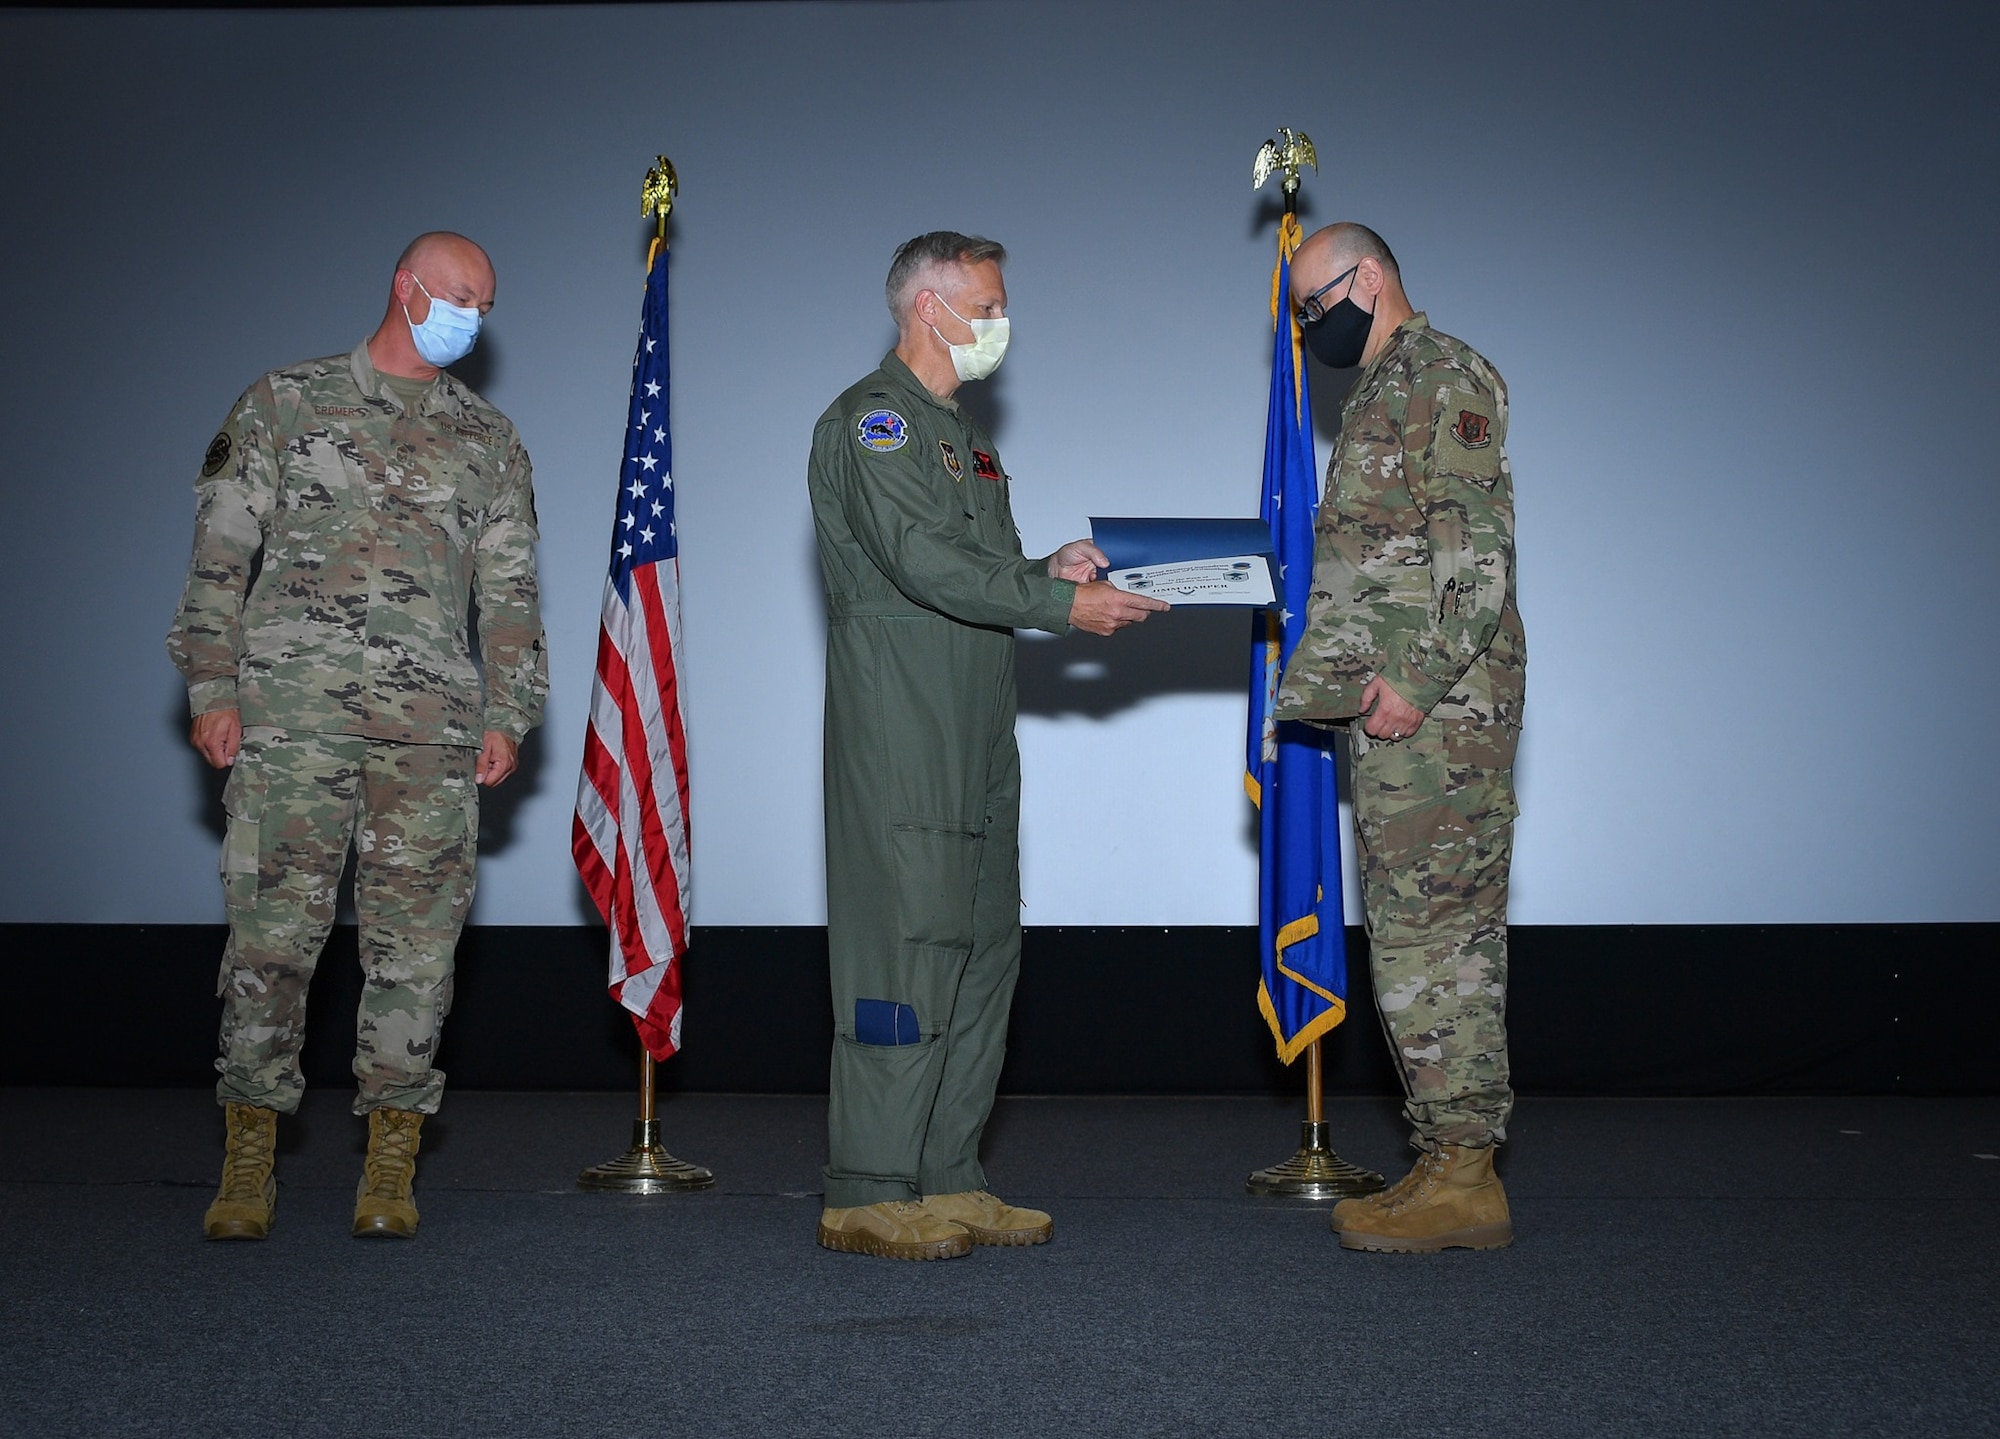 (center) 301 FW MDS Commander Col. Lawson Copley hands an enlisted promotion certificate to Senior Master Sgt. Jimm Harper during an MDS enlisted promotion ceremony at NAS JRB Fort Worth on August 8, 2021. Less than 2% of the enlisted force achieve the grade of E-8. (U.S. Air Force photos by Master Sgt. Jeremy Roman)